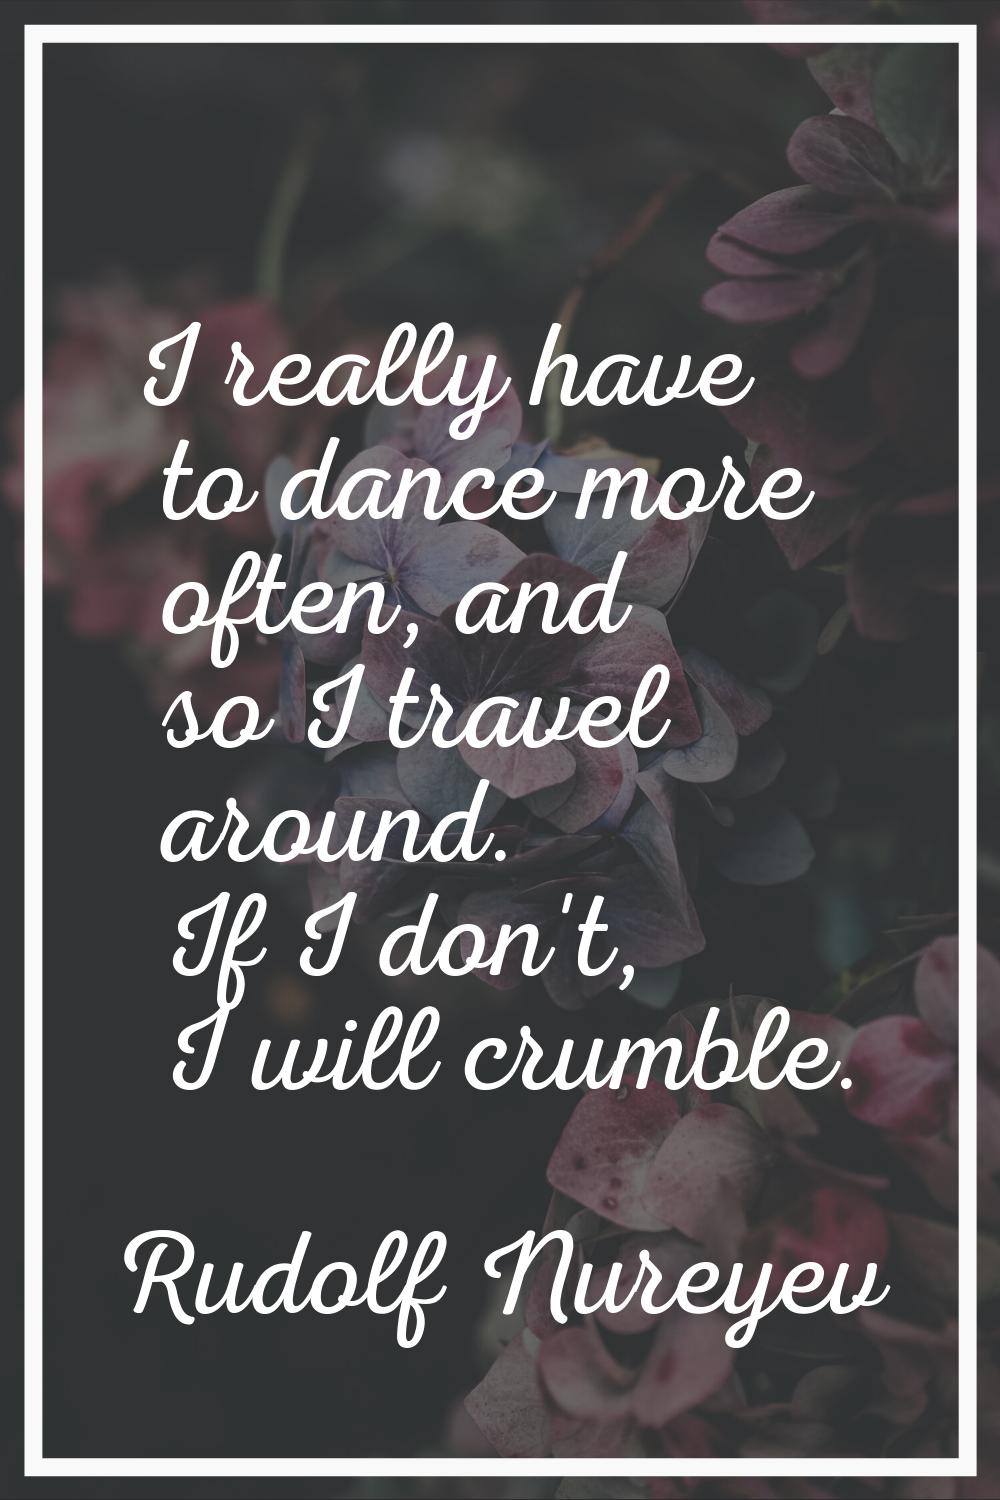 I really have to dance more often, and so I travel around. If I don't, I will crumble.